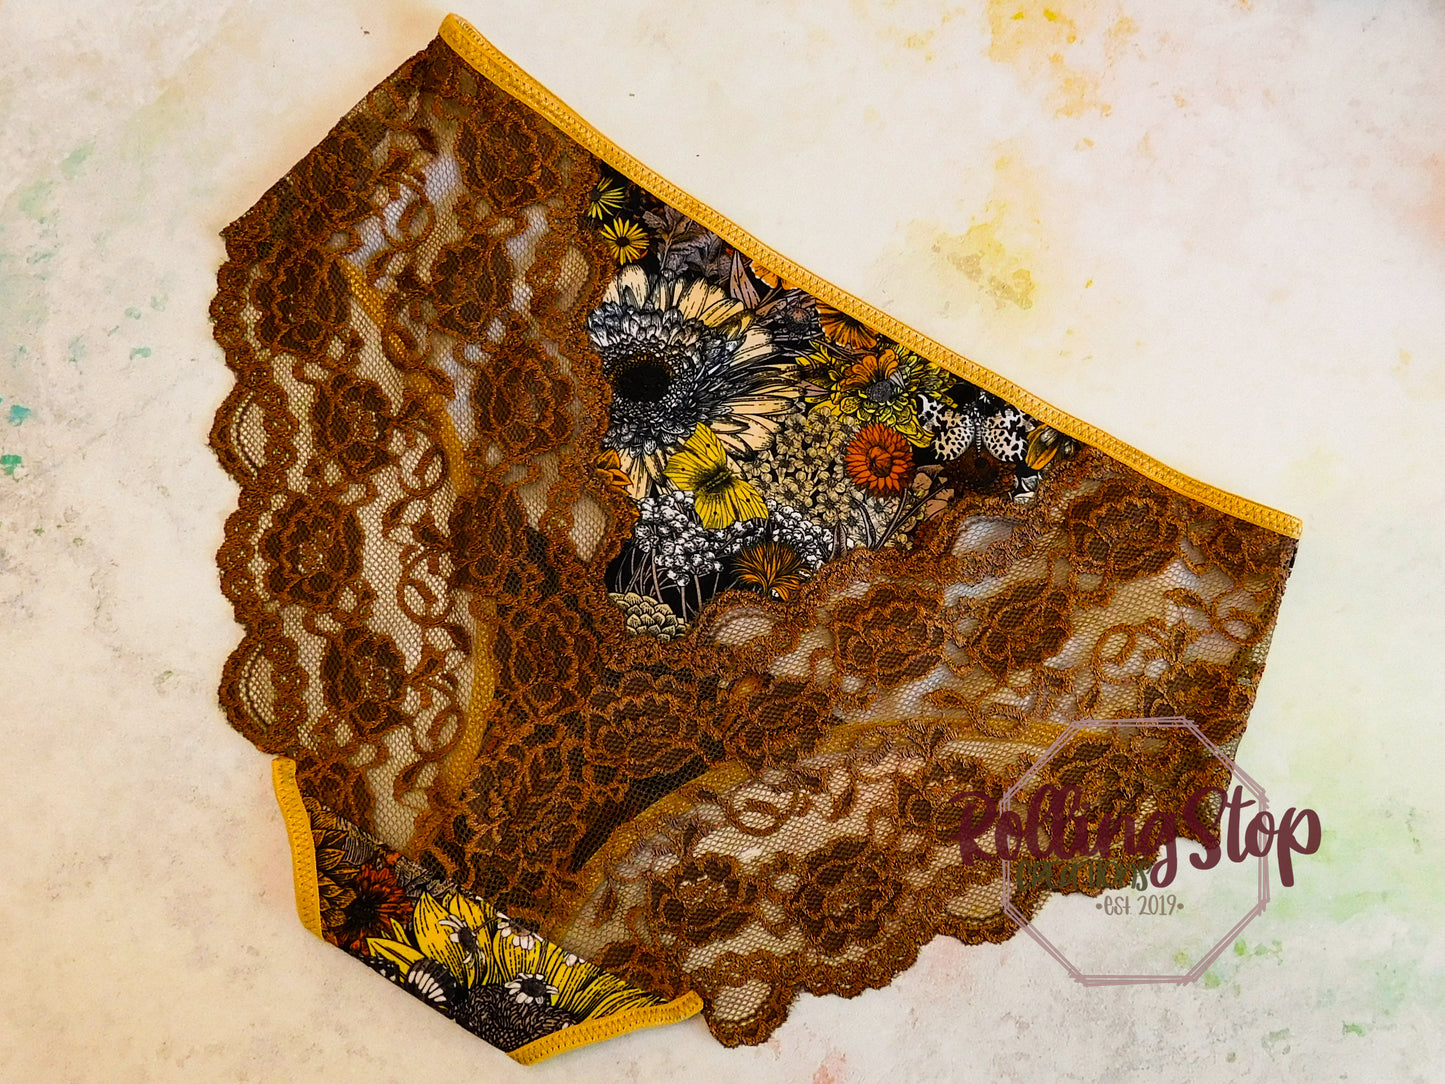 Fall Floral Lace Back Pantydrawls by Rolling Stop Creations sold by Rolling Stop Creations Lace - Lingerie - Panties